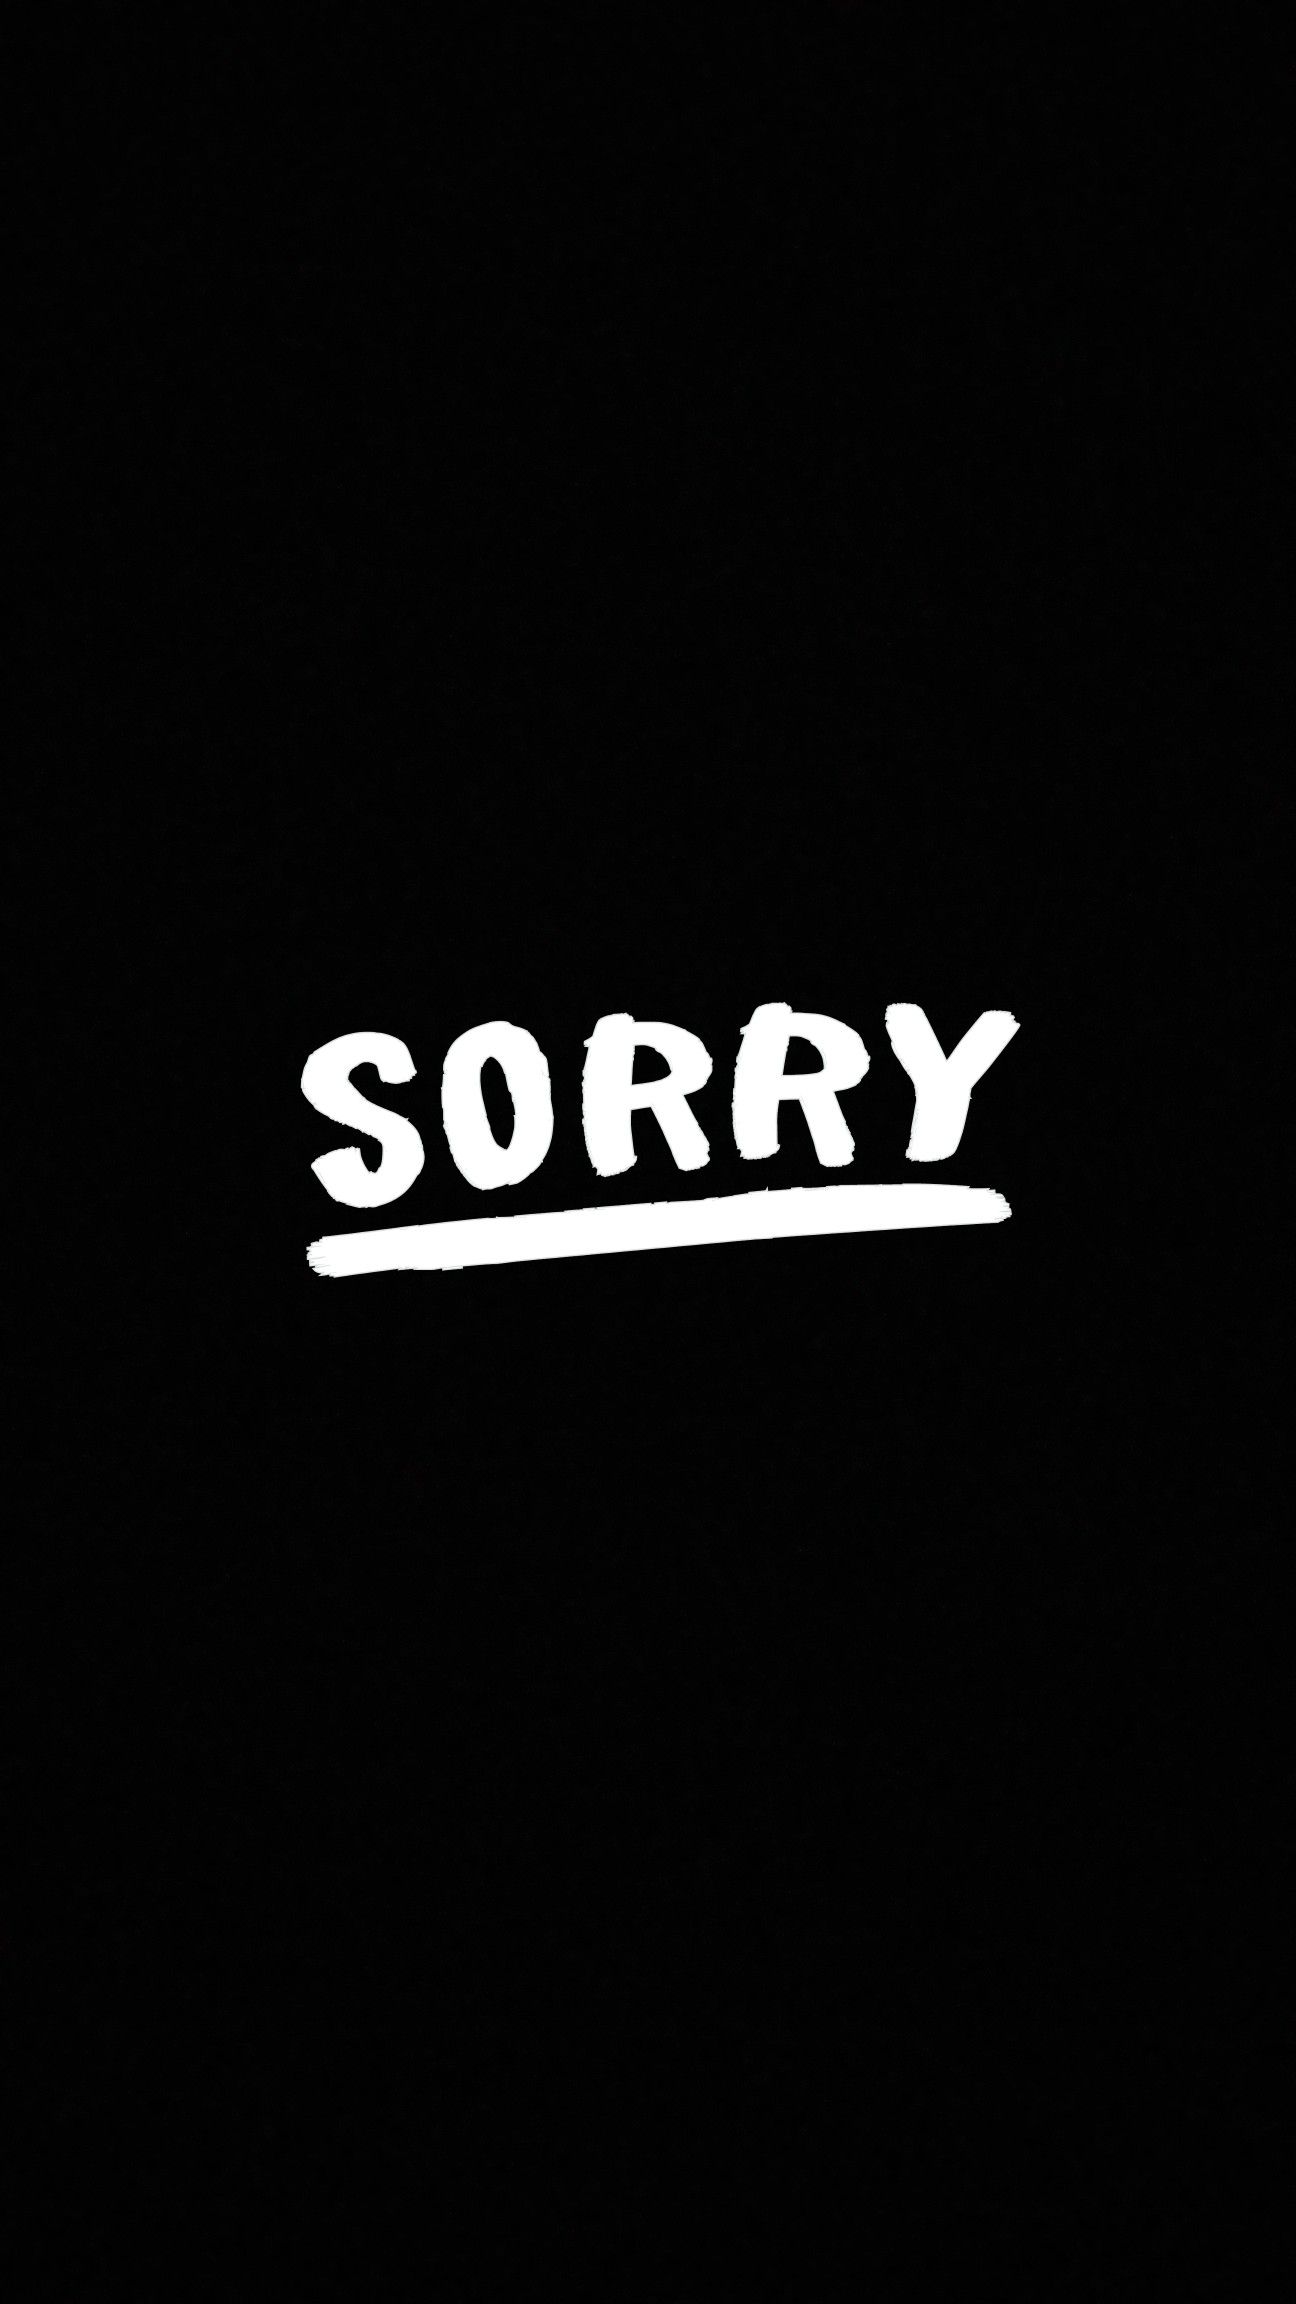 Sorry Wall Paper Wallpapers